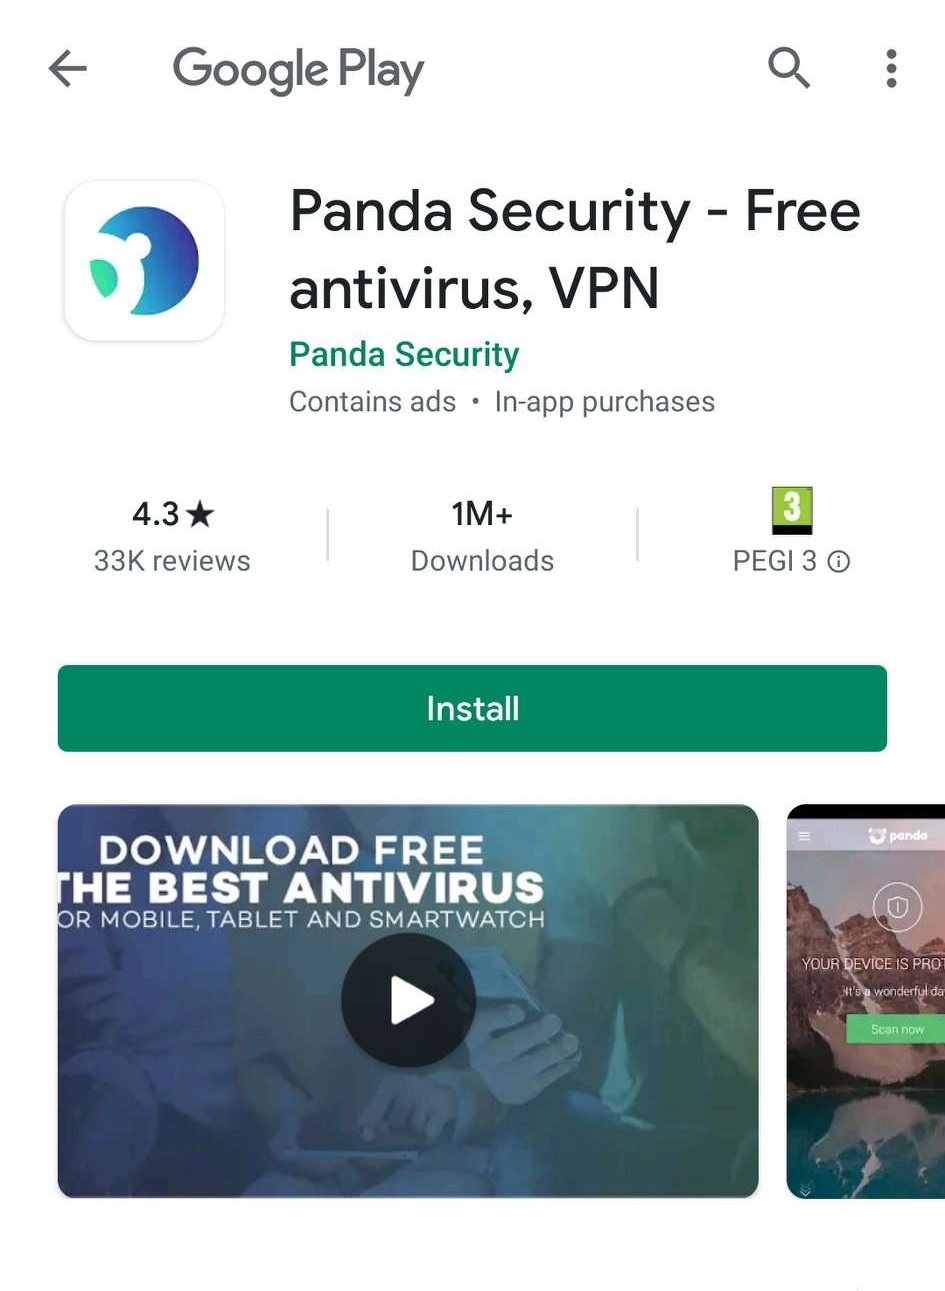 Activate Panda on Android